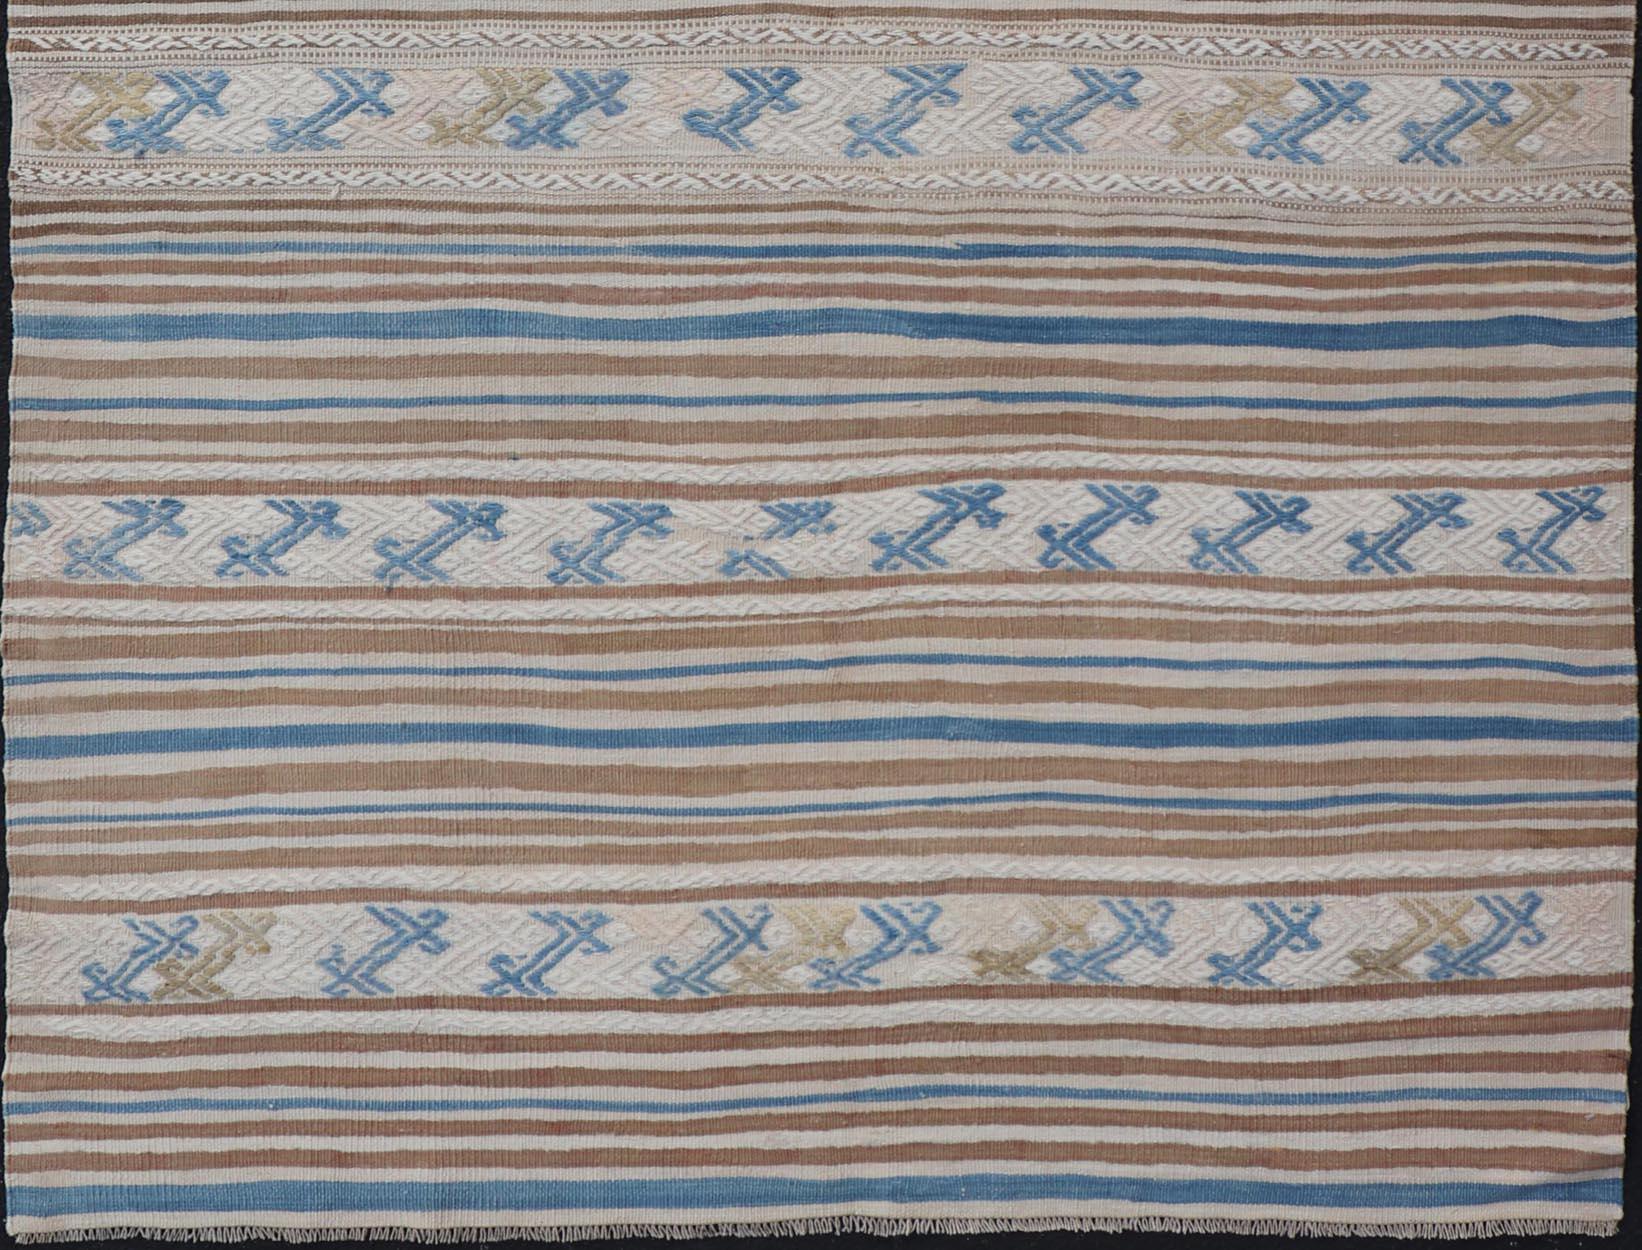 Vintage flat-weave Kilim with embroideries with a modern design in tan, brown, green and blue
geometric stripe design Vintage Kilim from Turkey, Keivan Woven Arts / rug EN-P13608, country of origin / type: Turkey / Kilim, circa 1950

Measures: